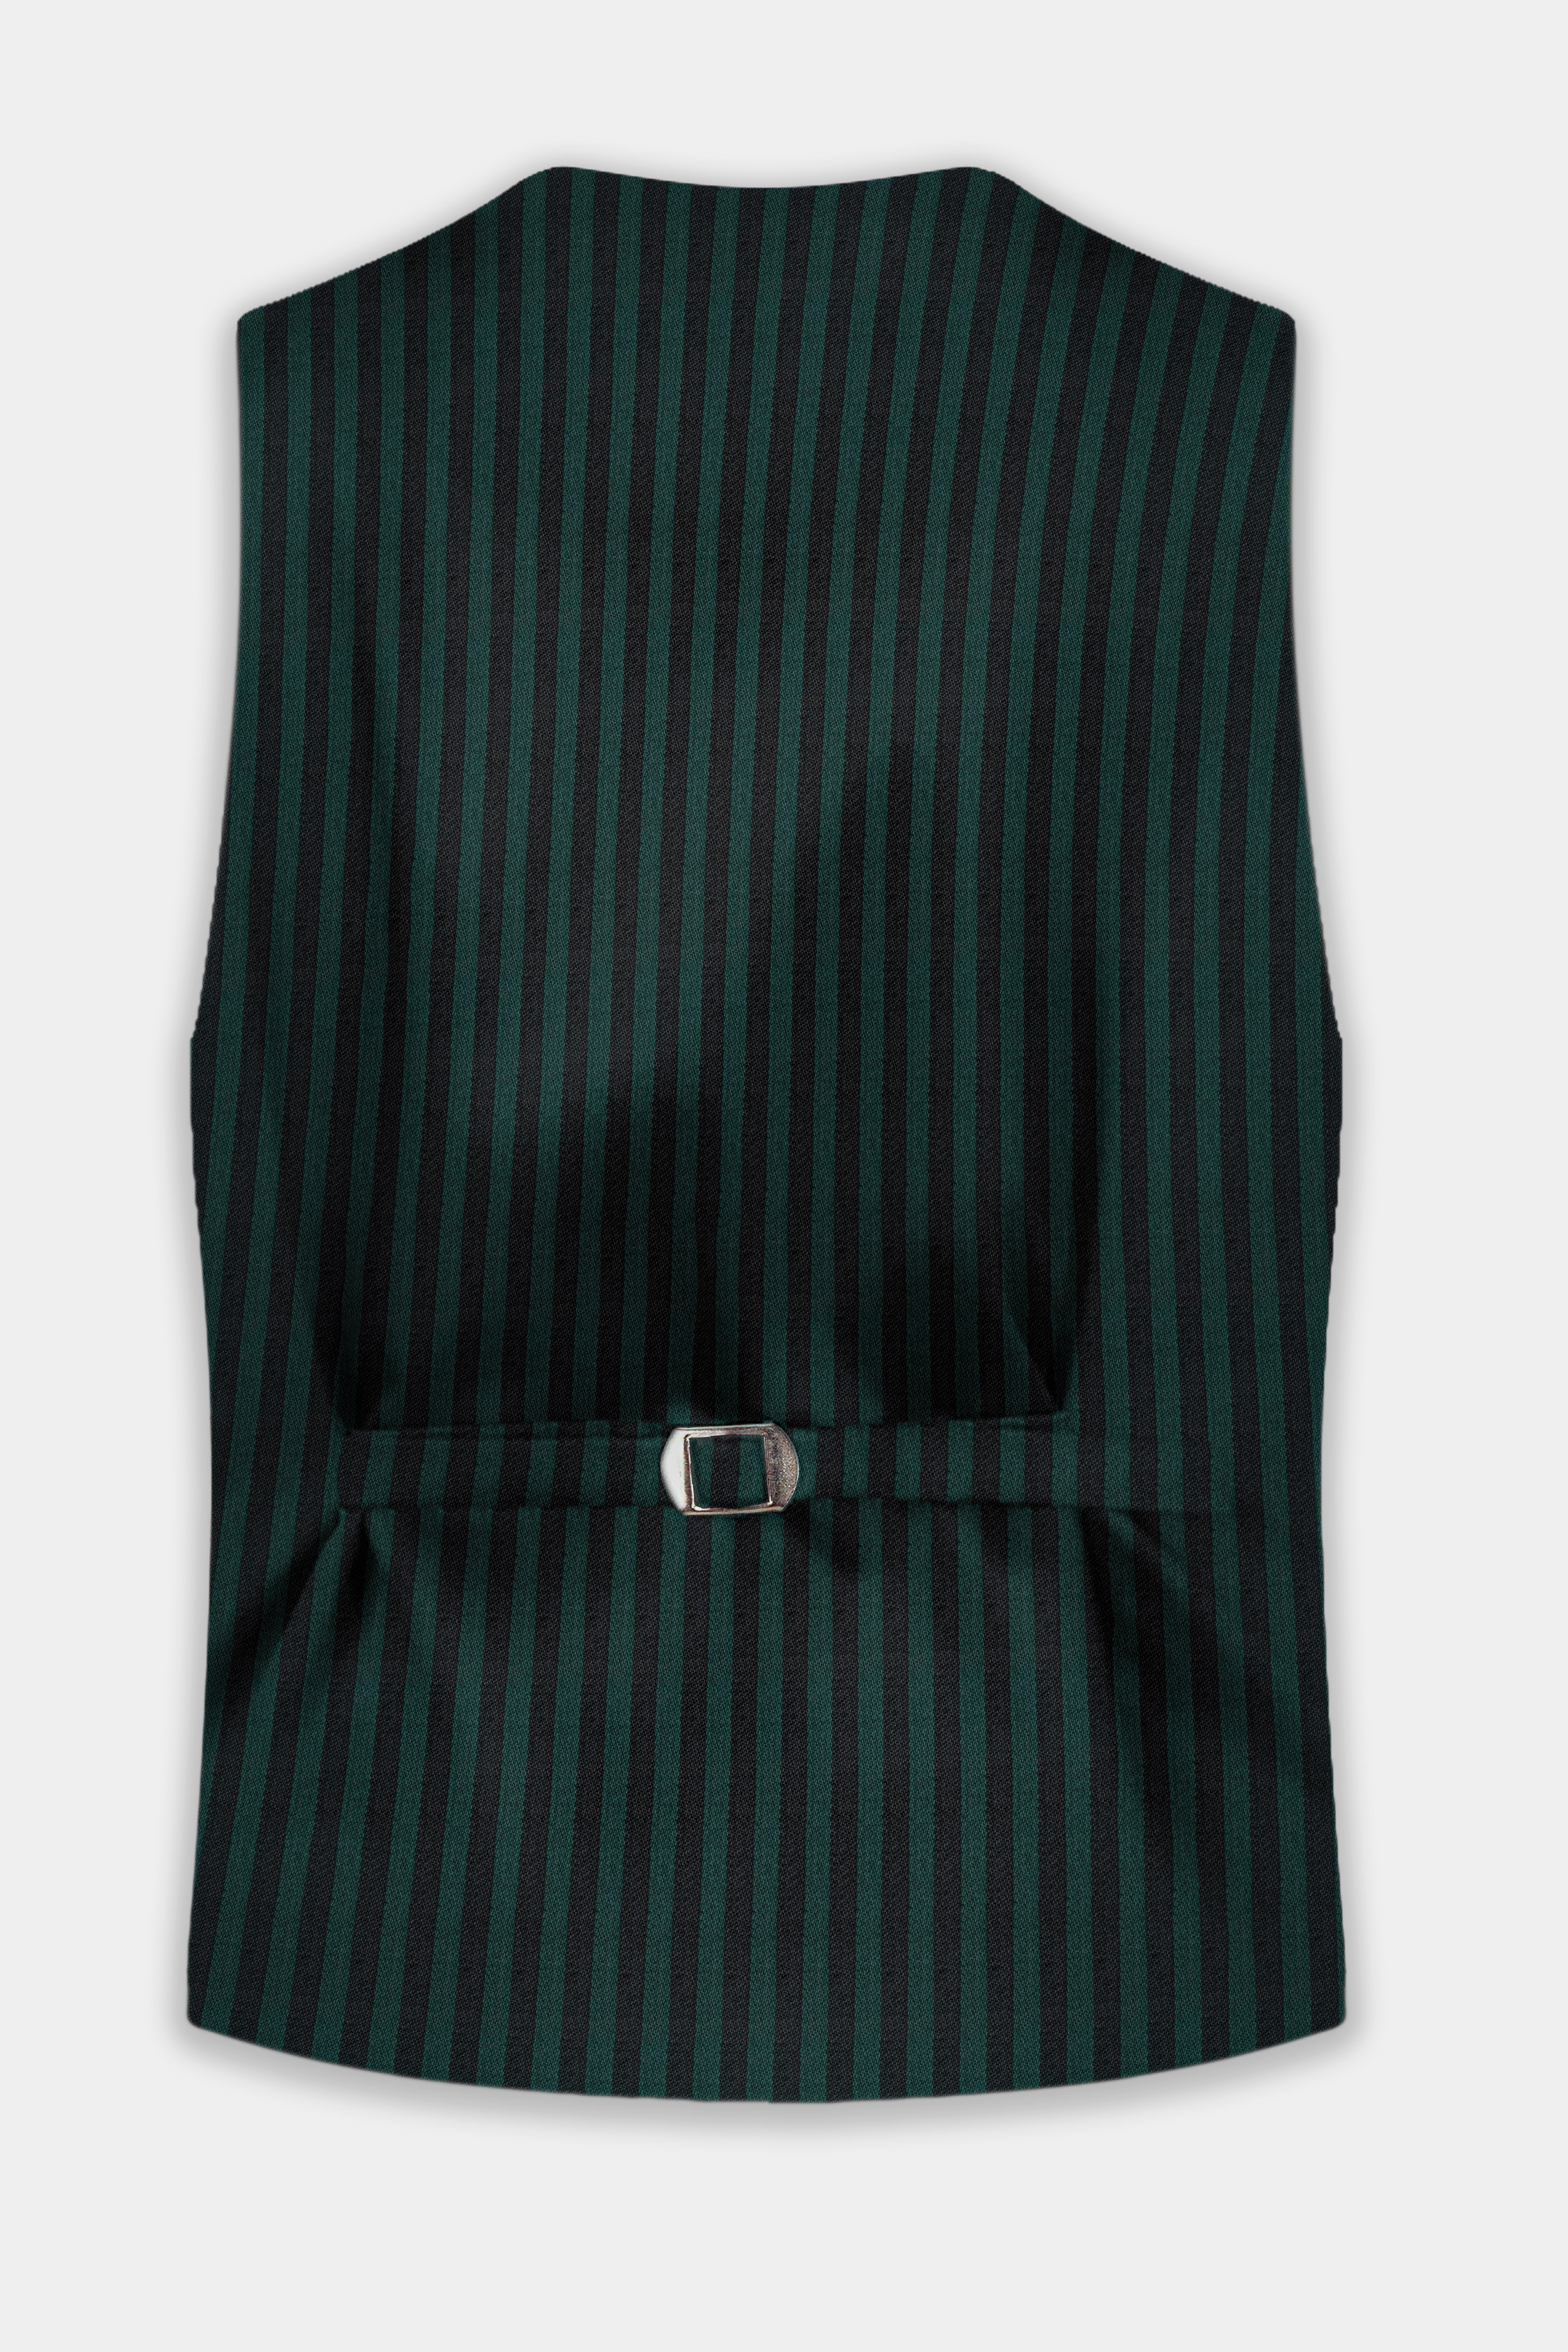 Celtic Green with Black Striped Wool Blend Waistcoat